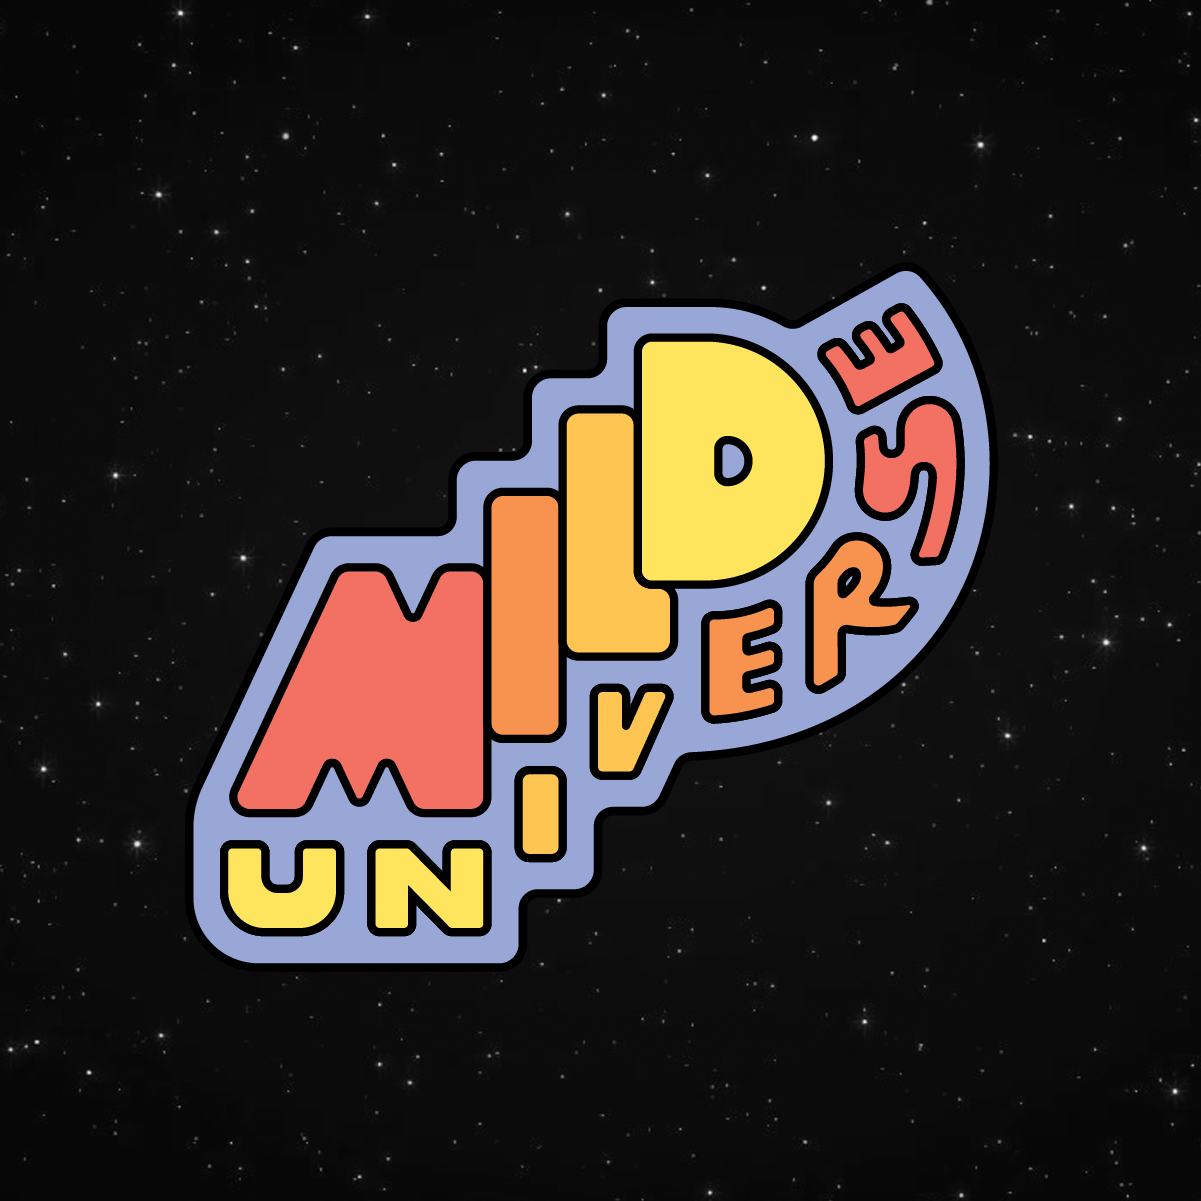 Animation featuring four different Mild Universe logo colorways